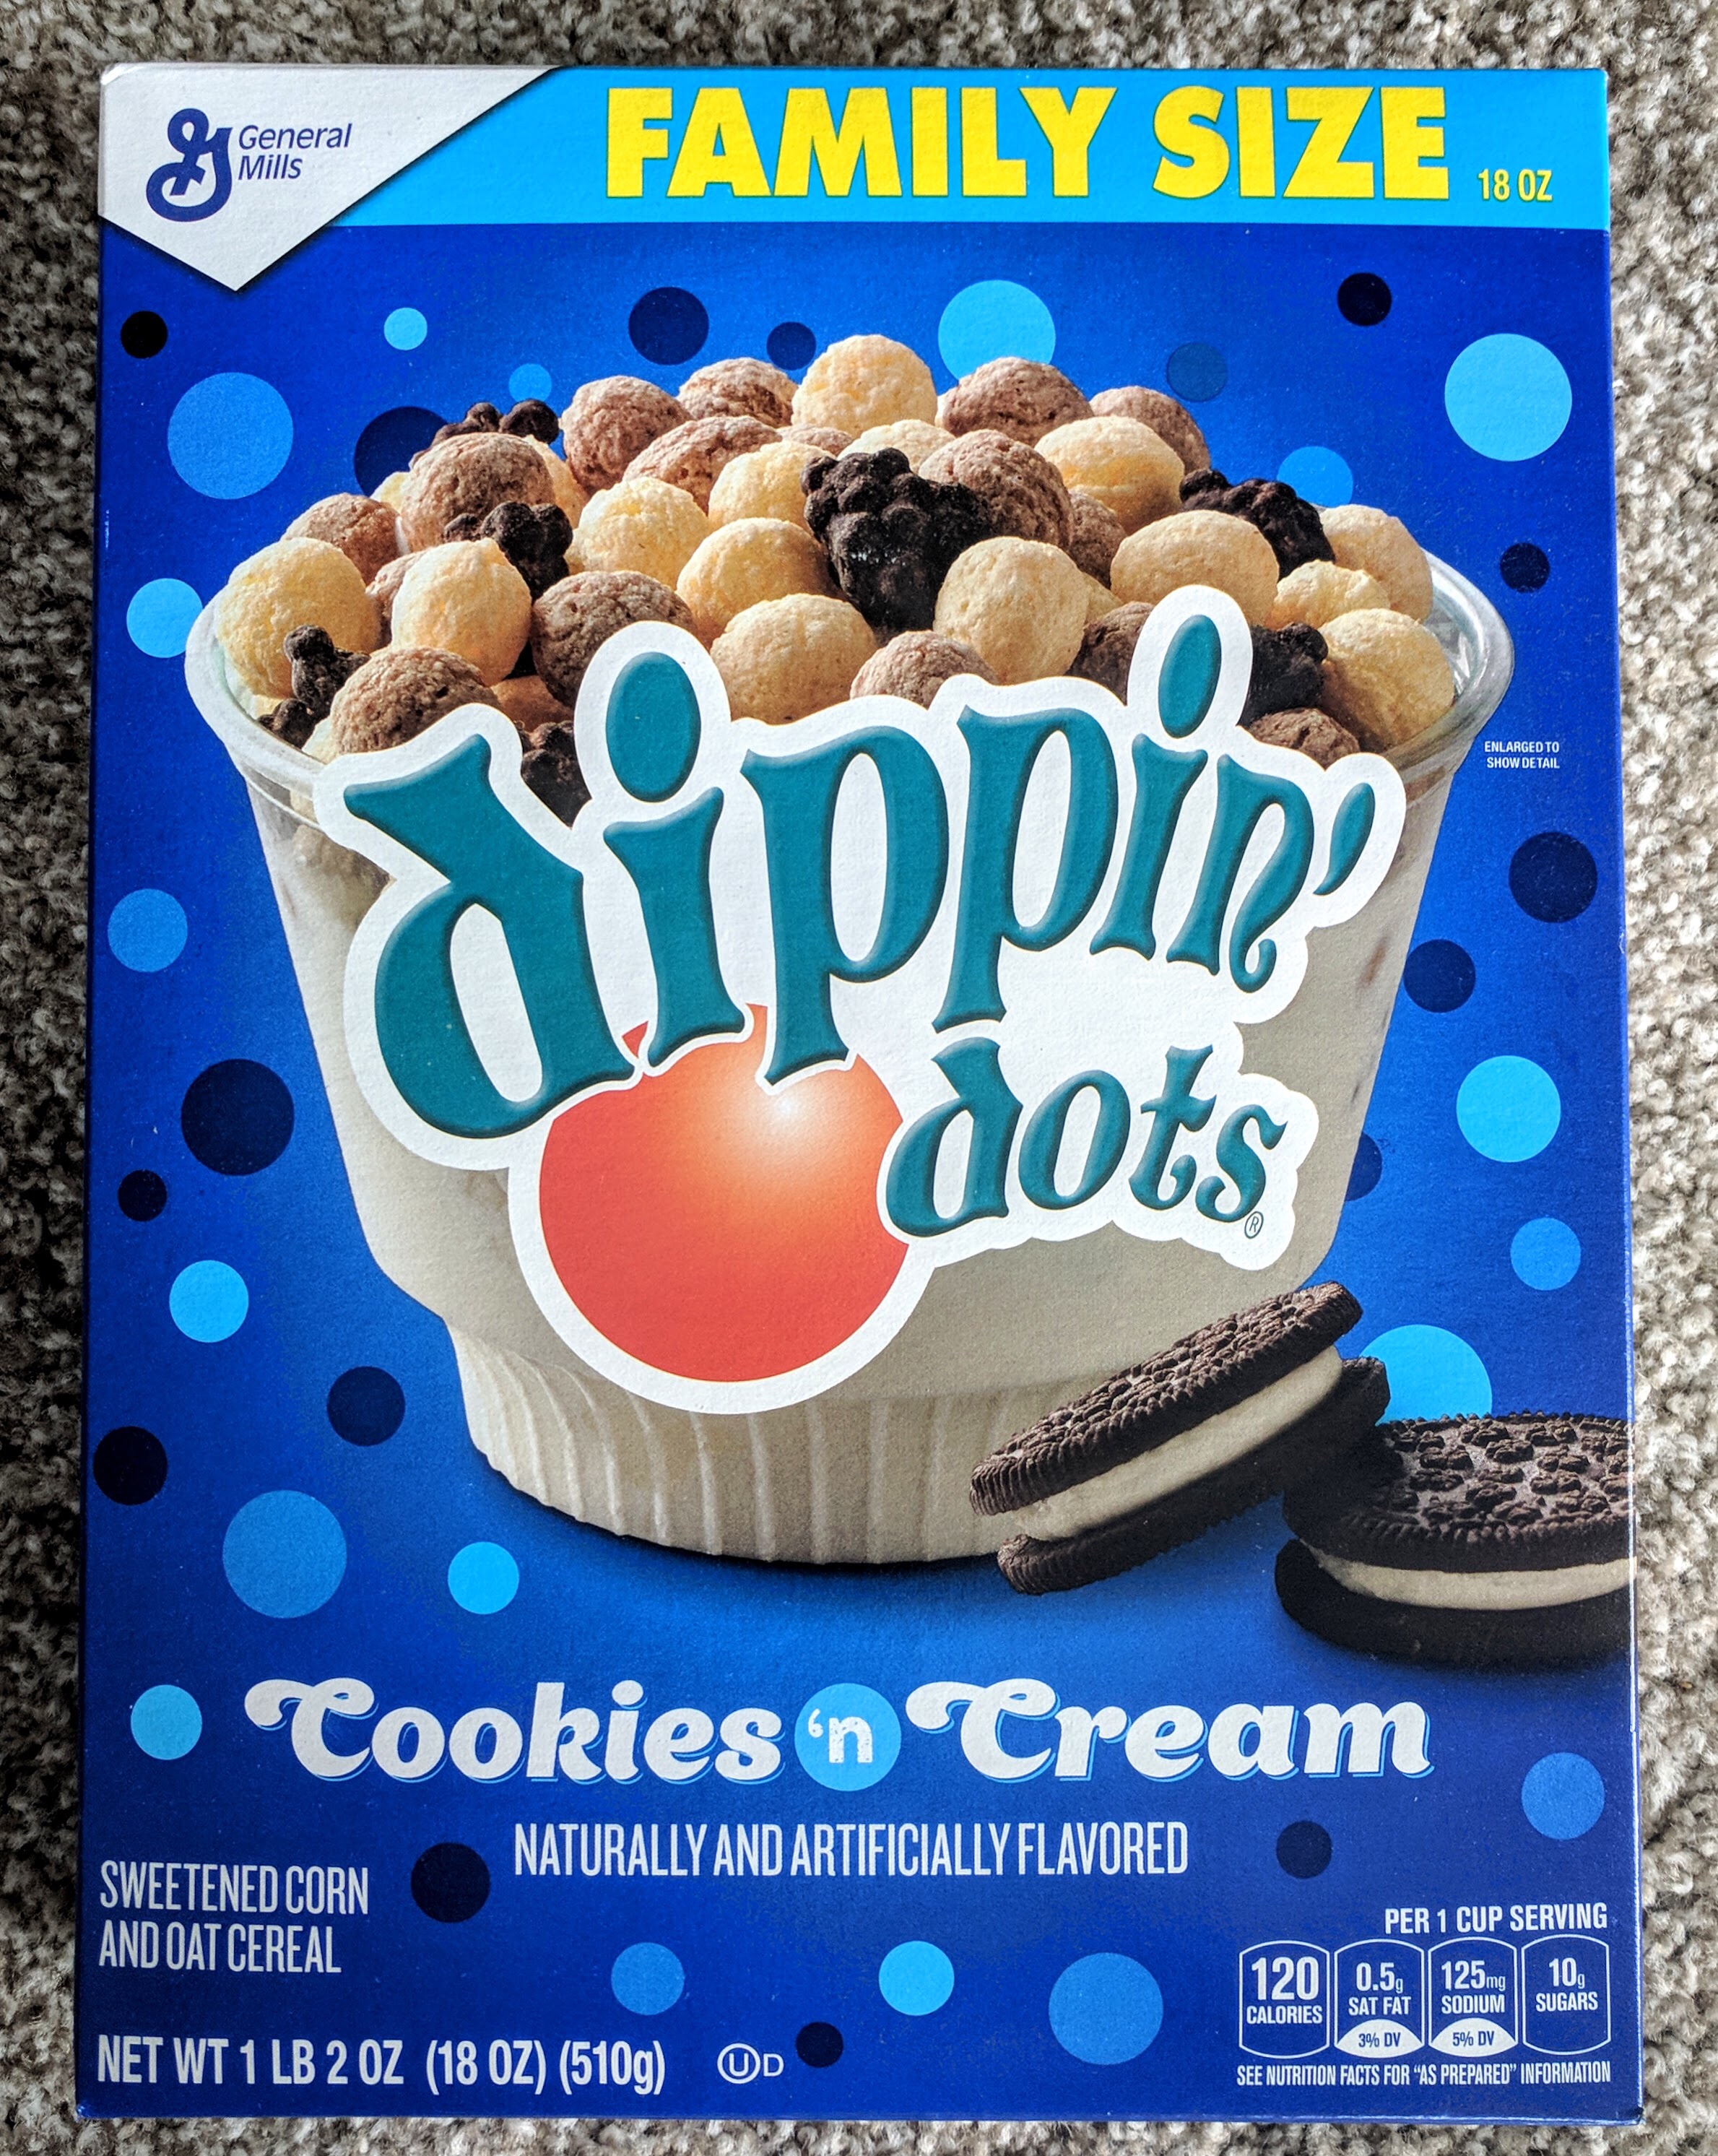 Post Cookies ‘n’ Creme Dippin’ Dots Cereal Review